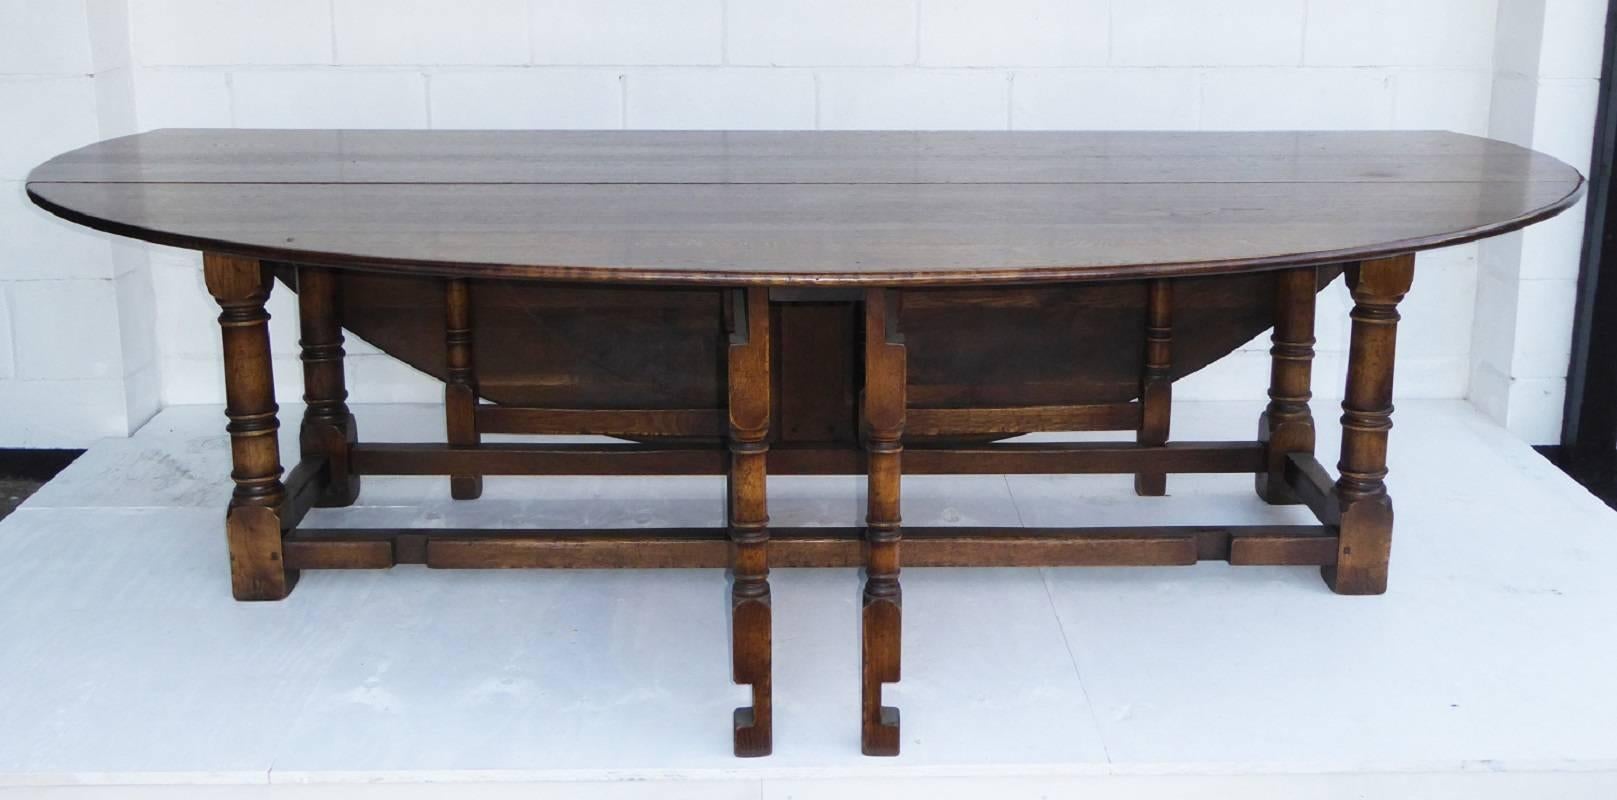 For sale is a good quality solid oak wakes table. The table has two drop leaves, one on either side, which are supported by a gated base. When the table is open, it is oval in shape and stands on gun barrel legs. This piece is in very good condition